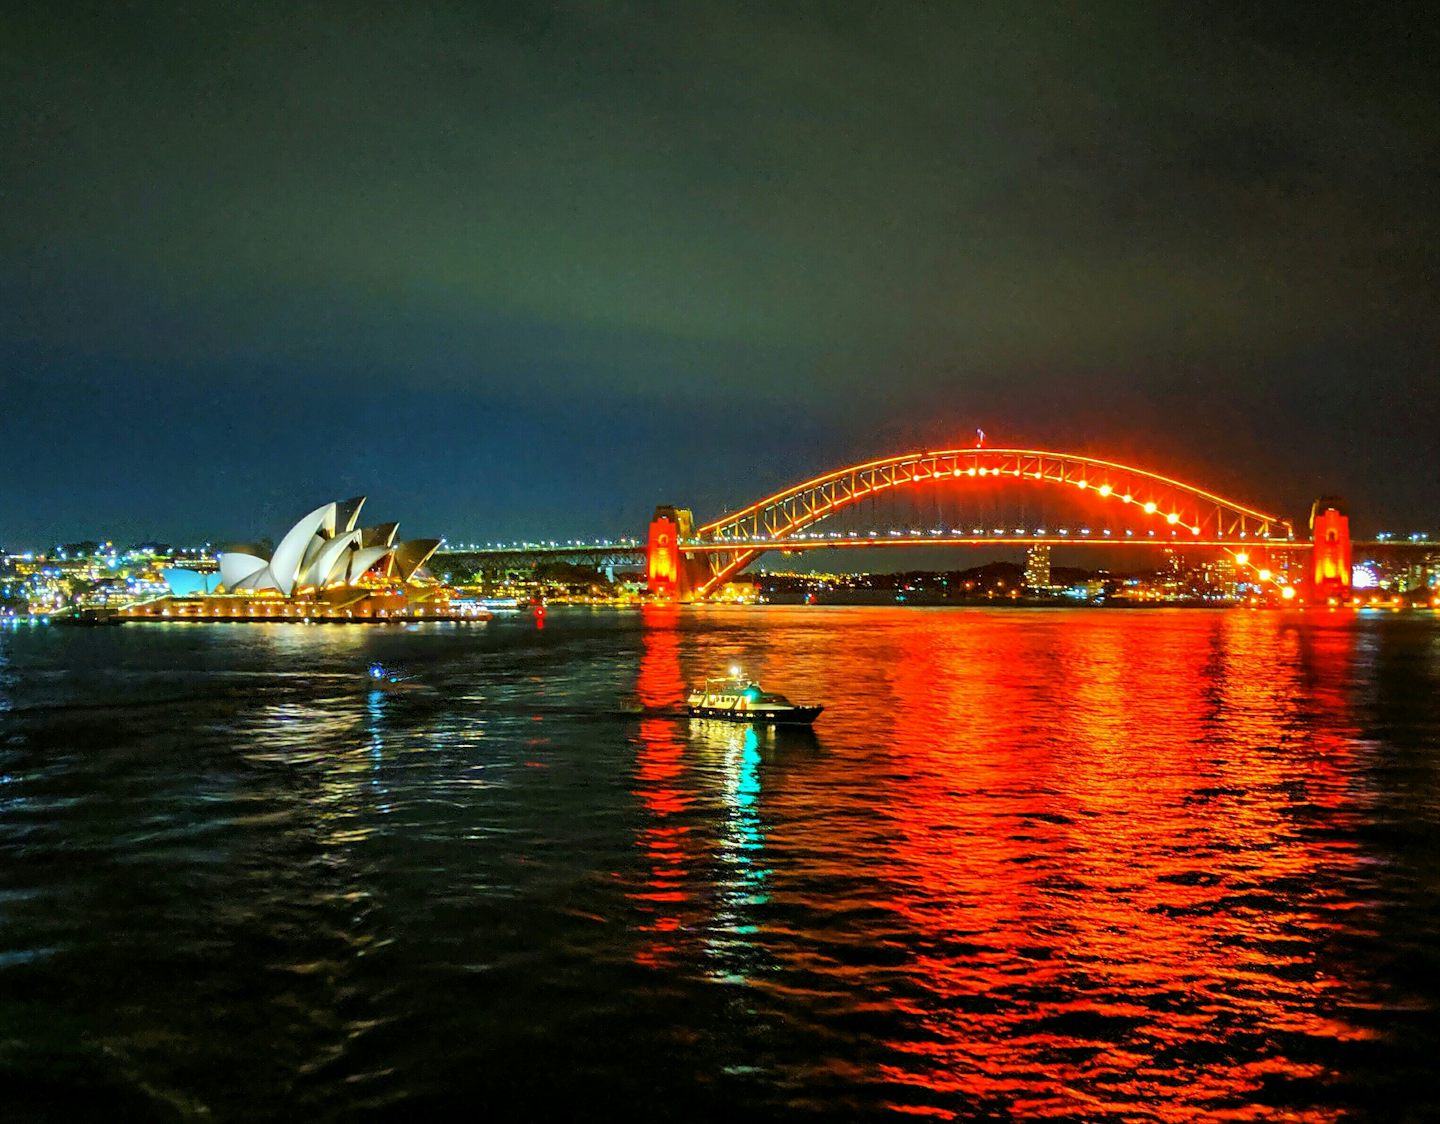 Leaving the stunning Sydney Harbour behind us as we set off on our cruise.